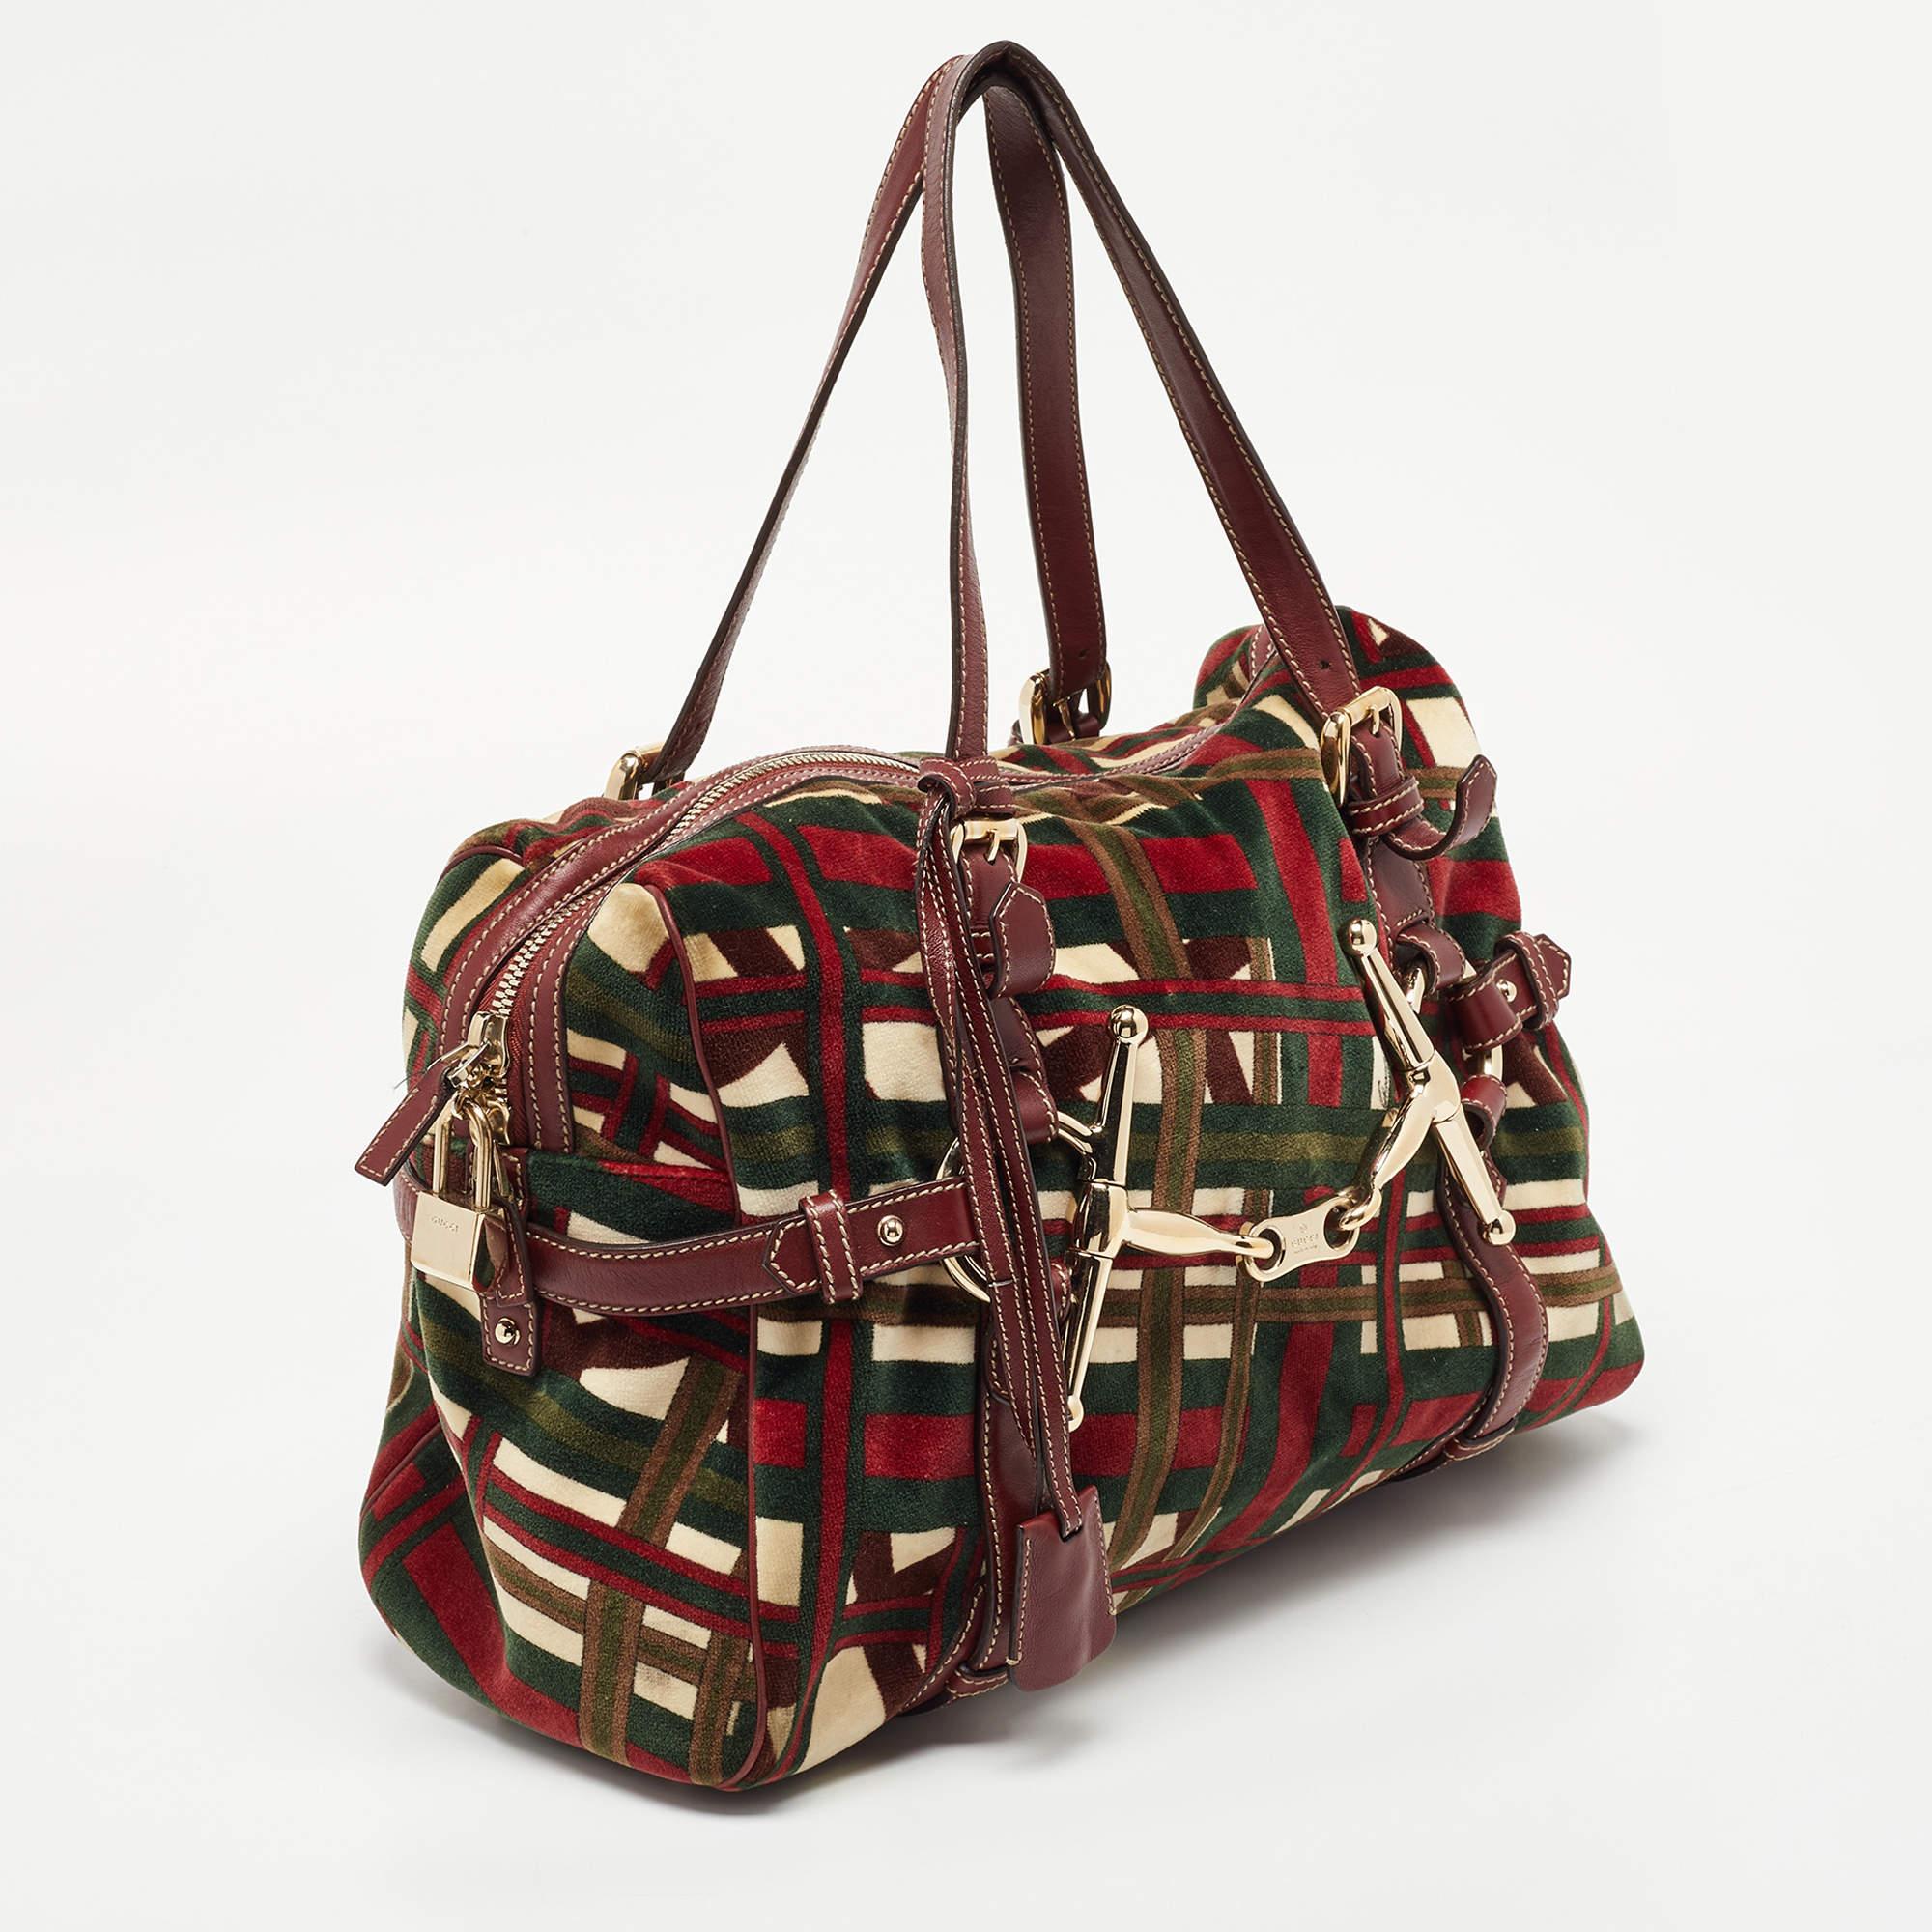 This gorgeous Gucci bag was introduced in celebration of its 85th anniversary, and it comes crafted from velvet and leather. It has Bit accents at the front and the anniversary plaque at the back. Two handles and a spacious interior make it